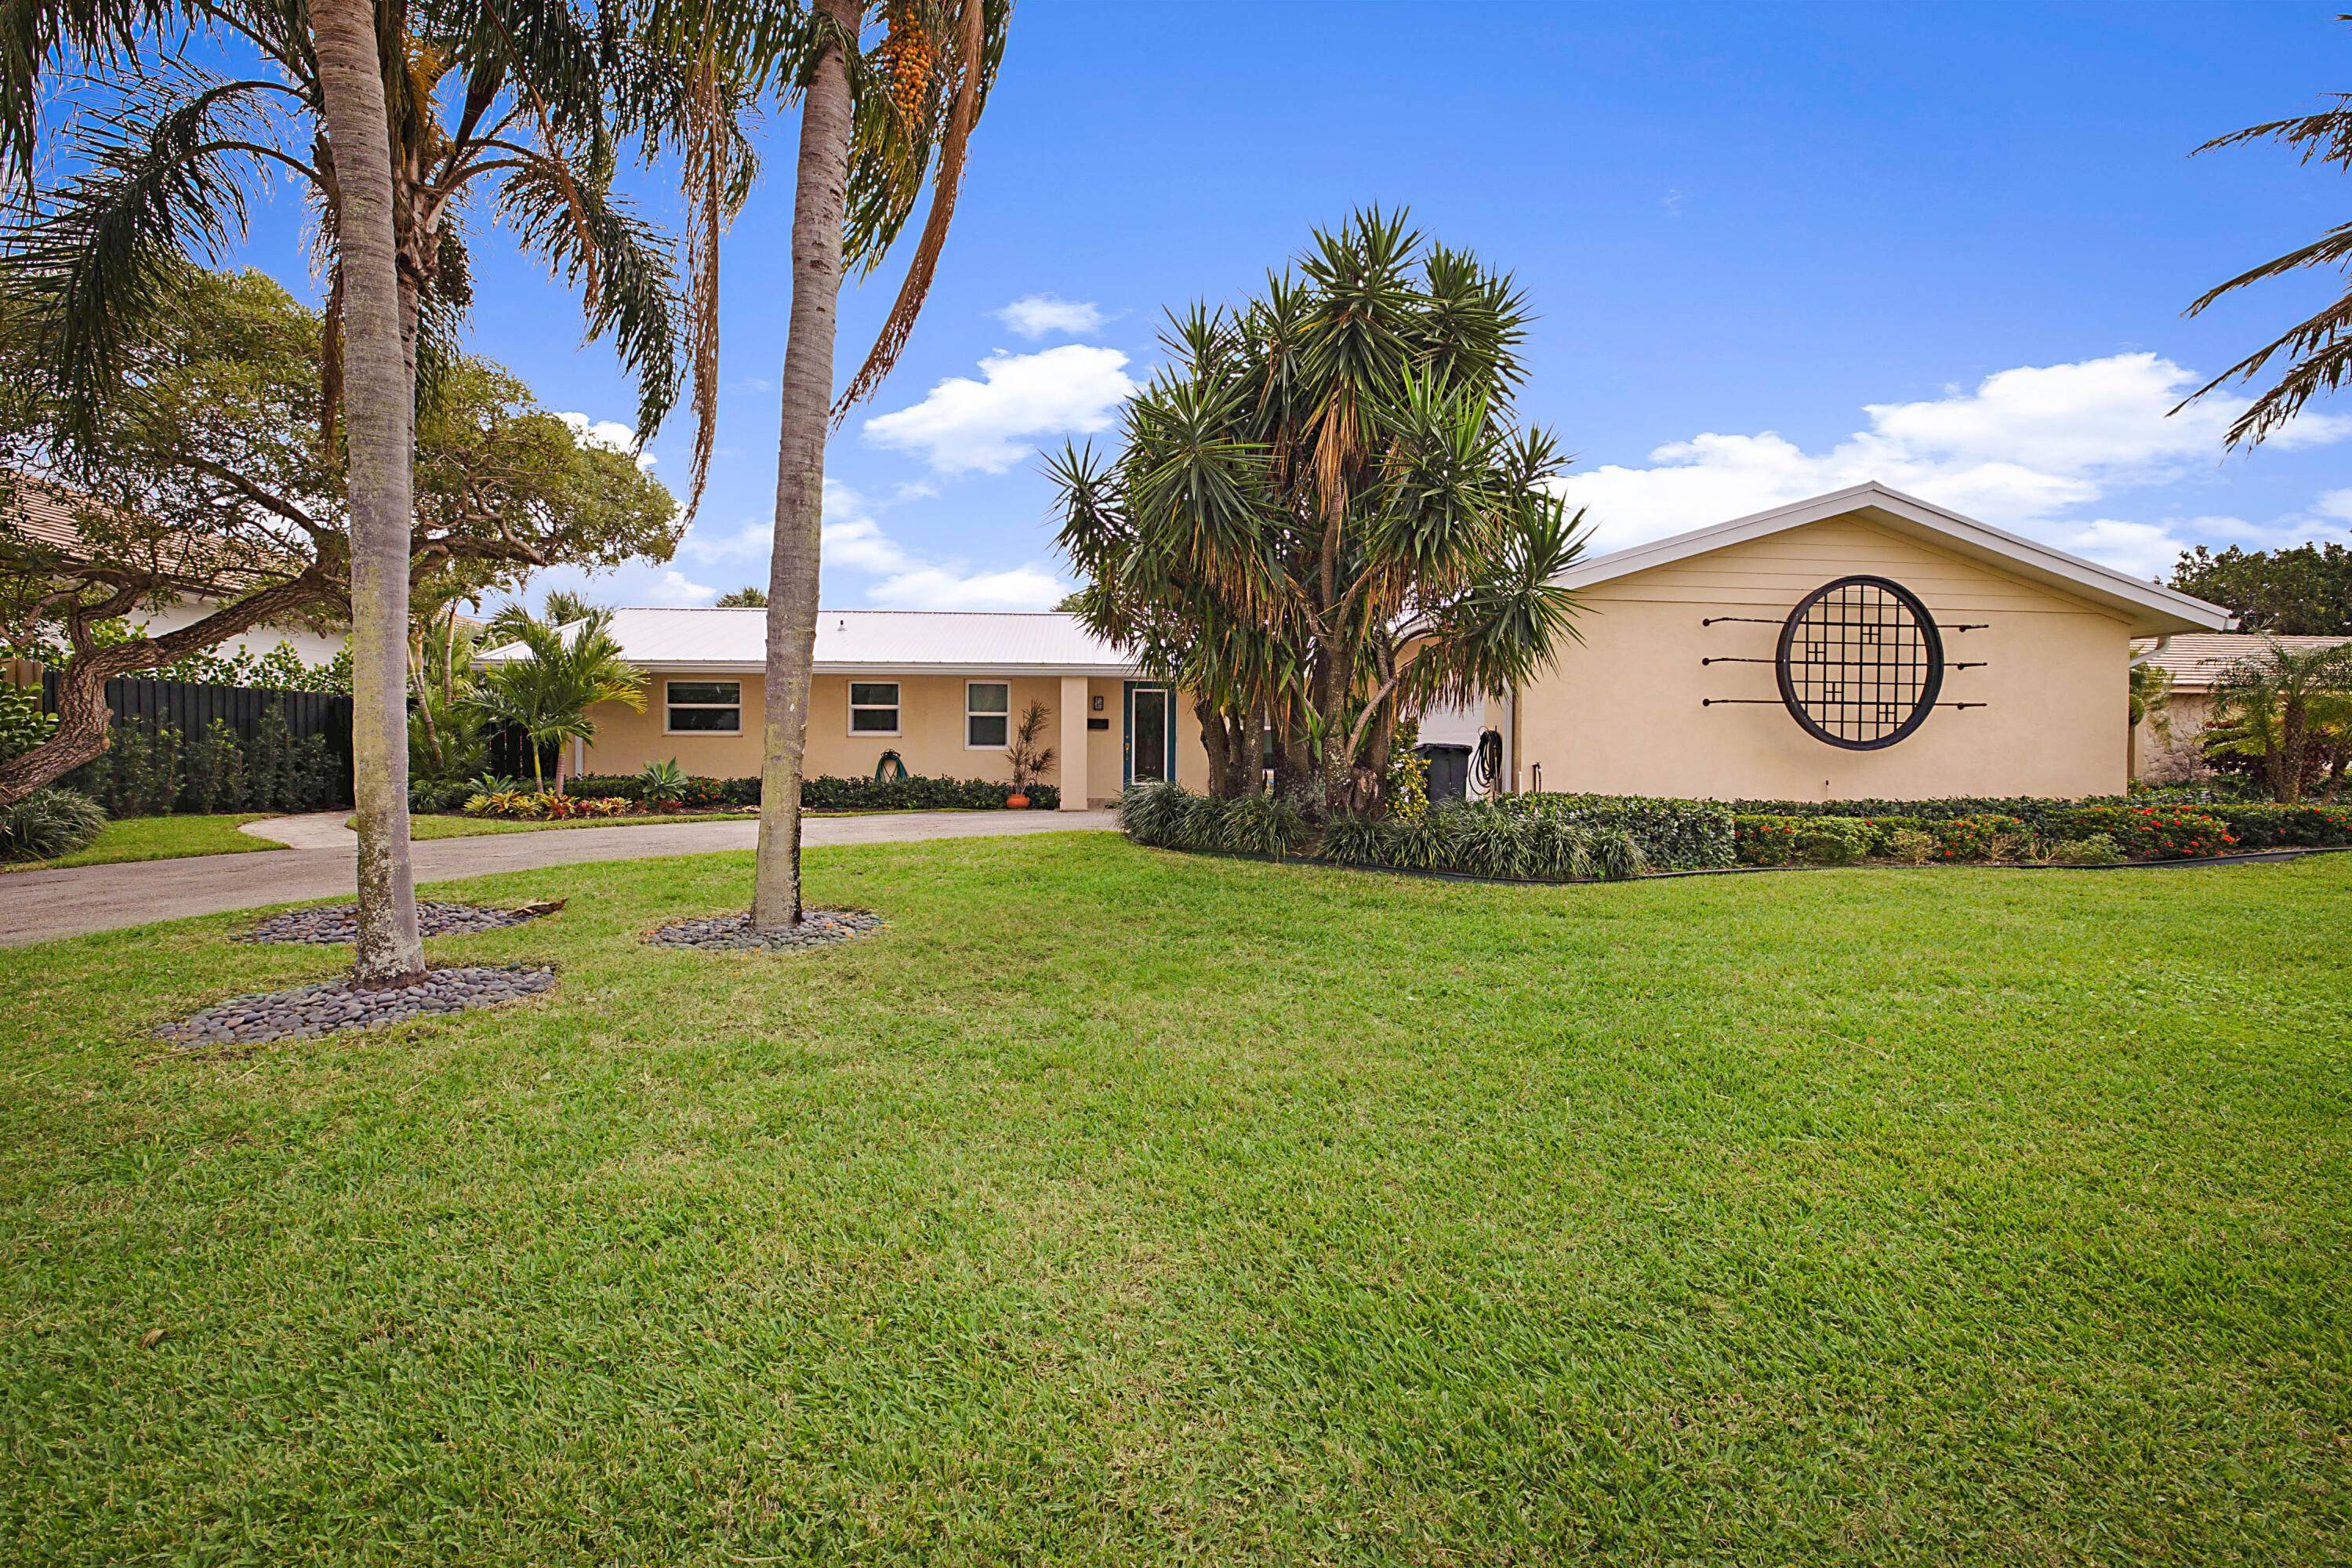 Come see this Mid Century modern three bedroom, three bath, pool home in the much sought after Yacht Club Village, North Palm Beach.